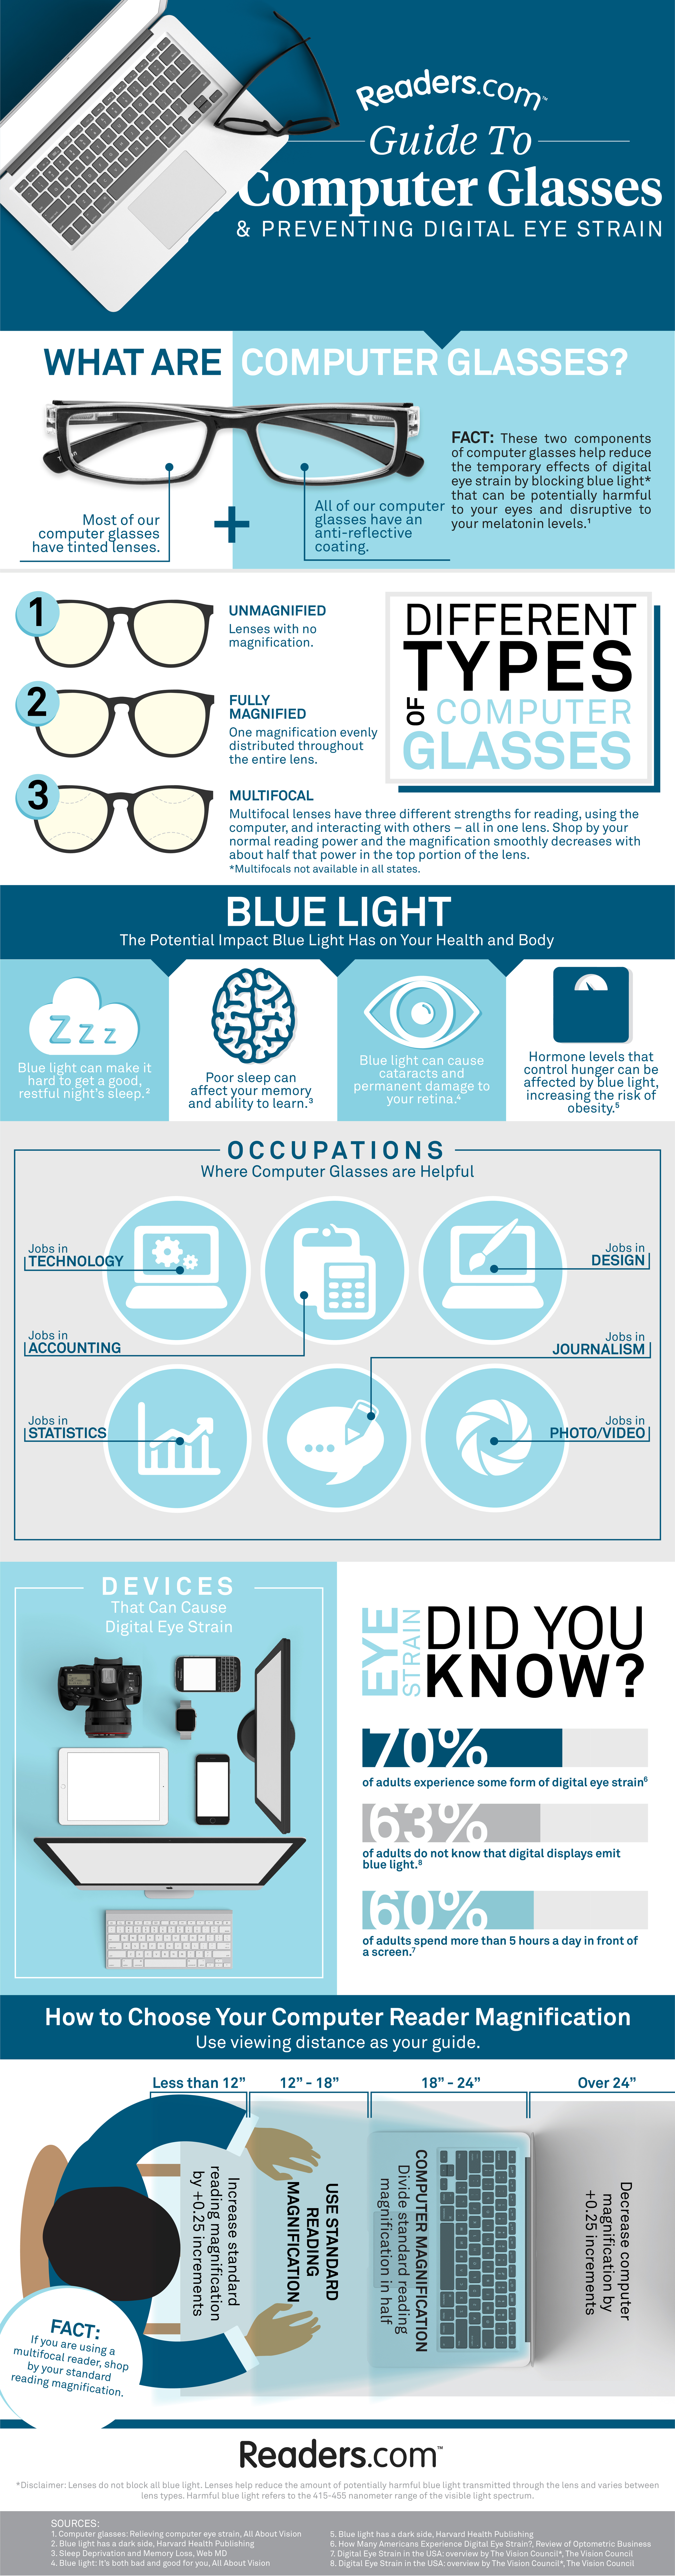 infographic on facts and types of computer reading glasses 